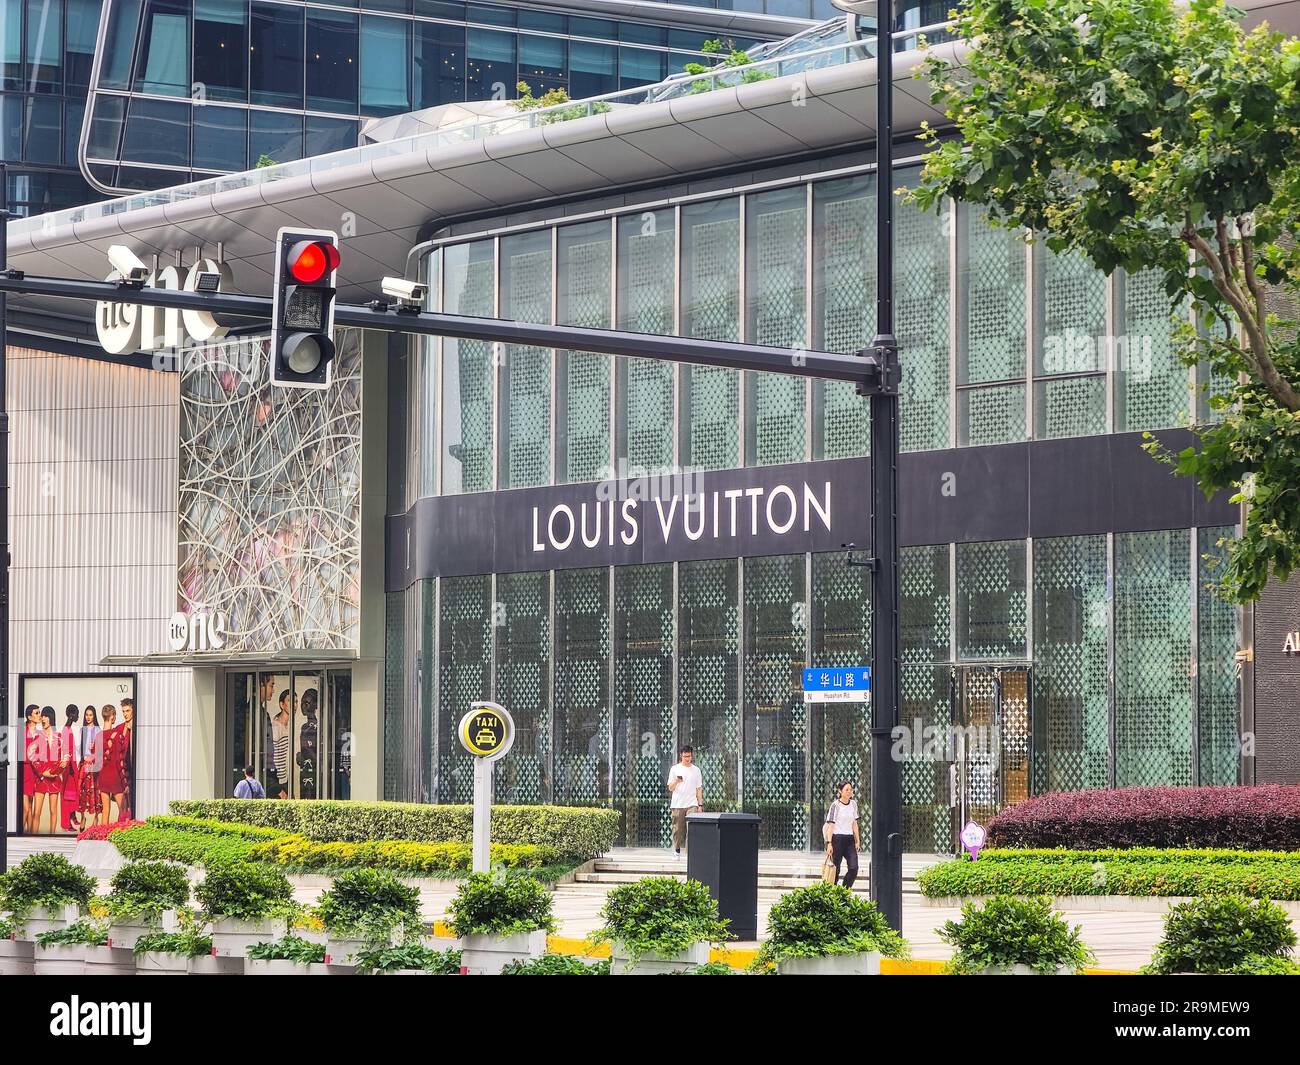 SHANGHAI, CHINA - DECEMBER 18, 2021 - A Louis Vuitton Christmas tree is  seen at the Xujiahui Shopping District shopping mall in Shanghai, China, on  De Stock Photo - Alamy